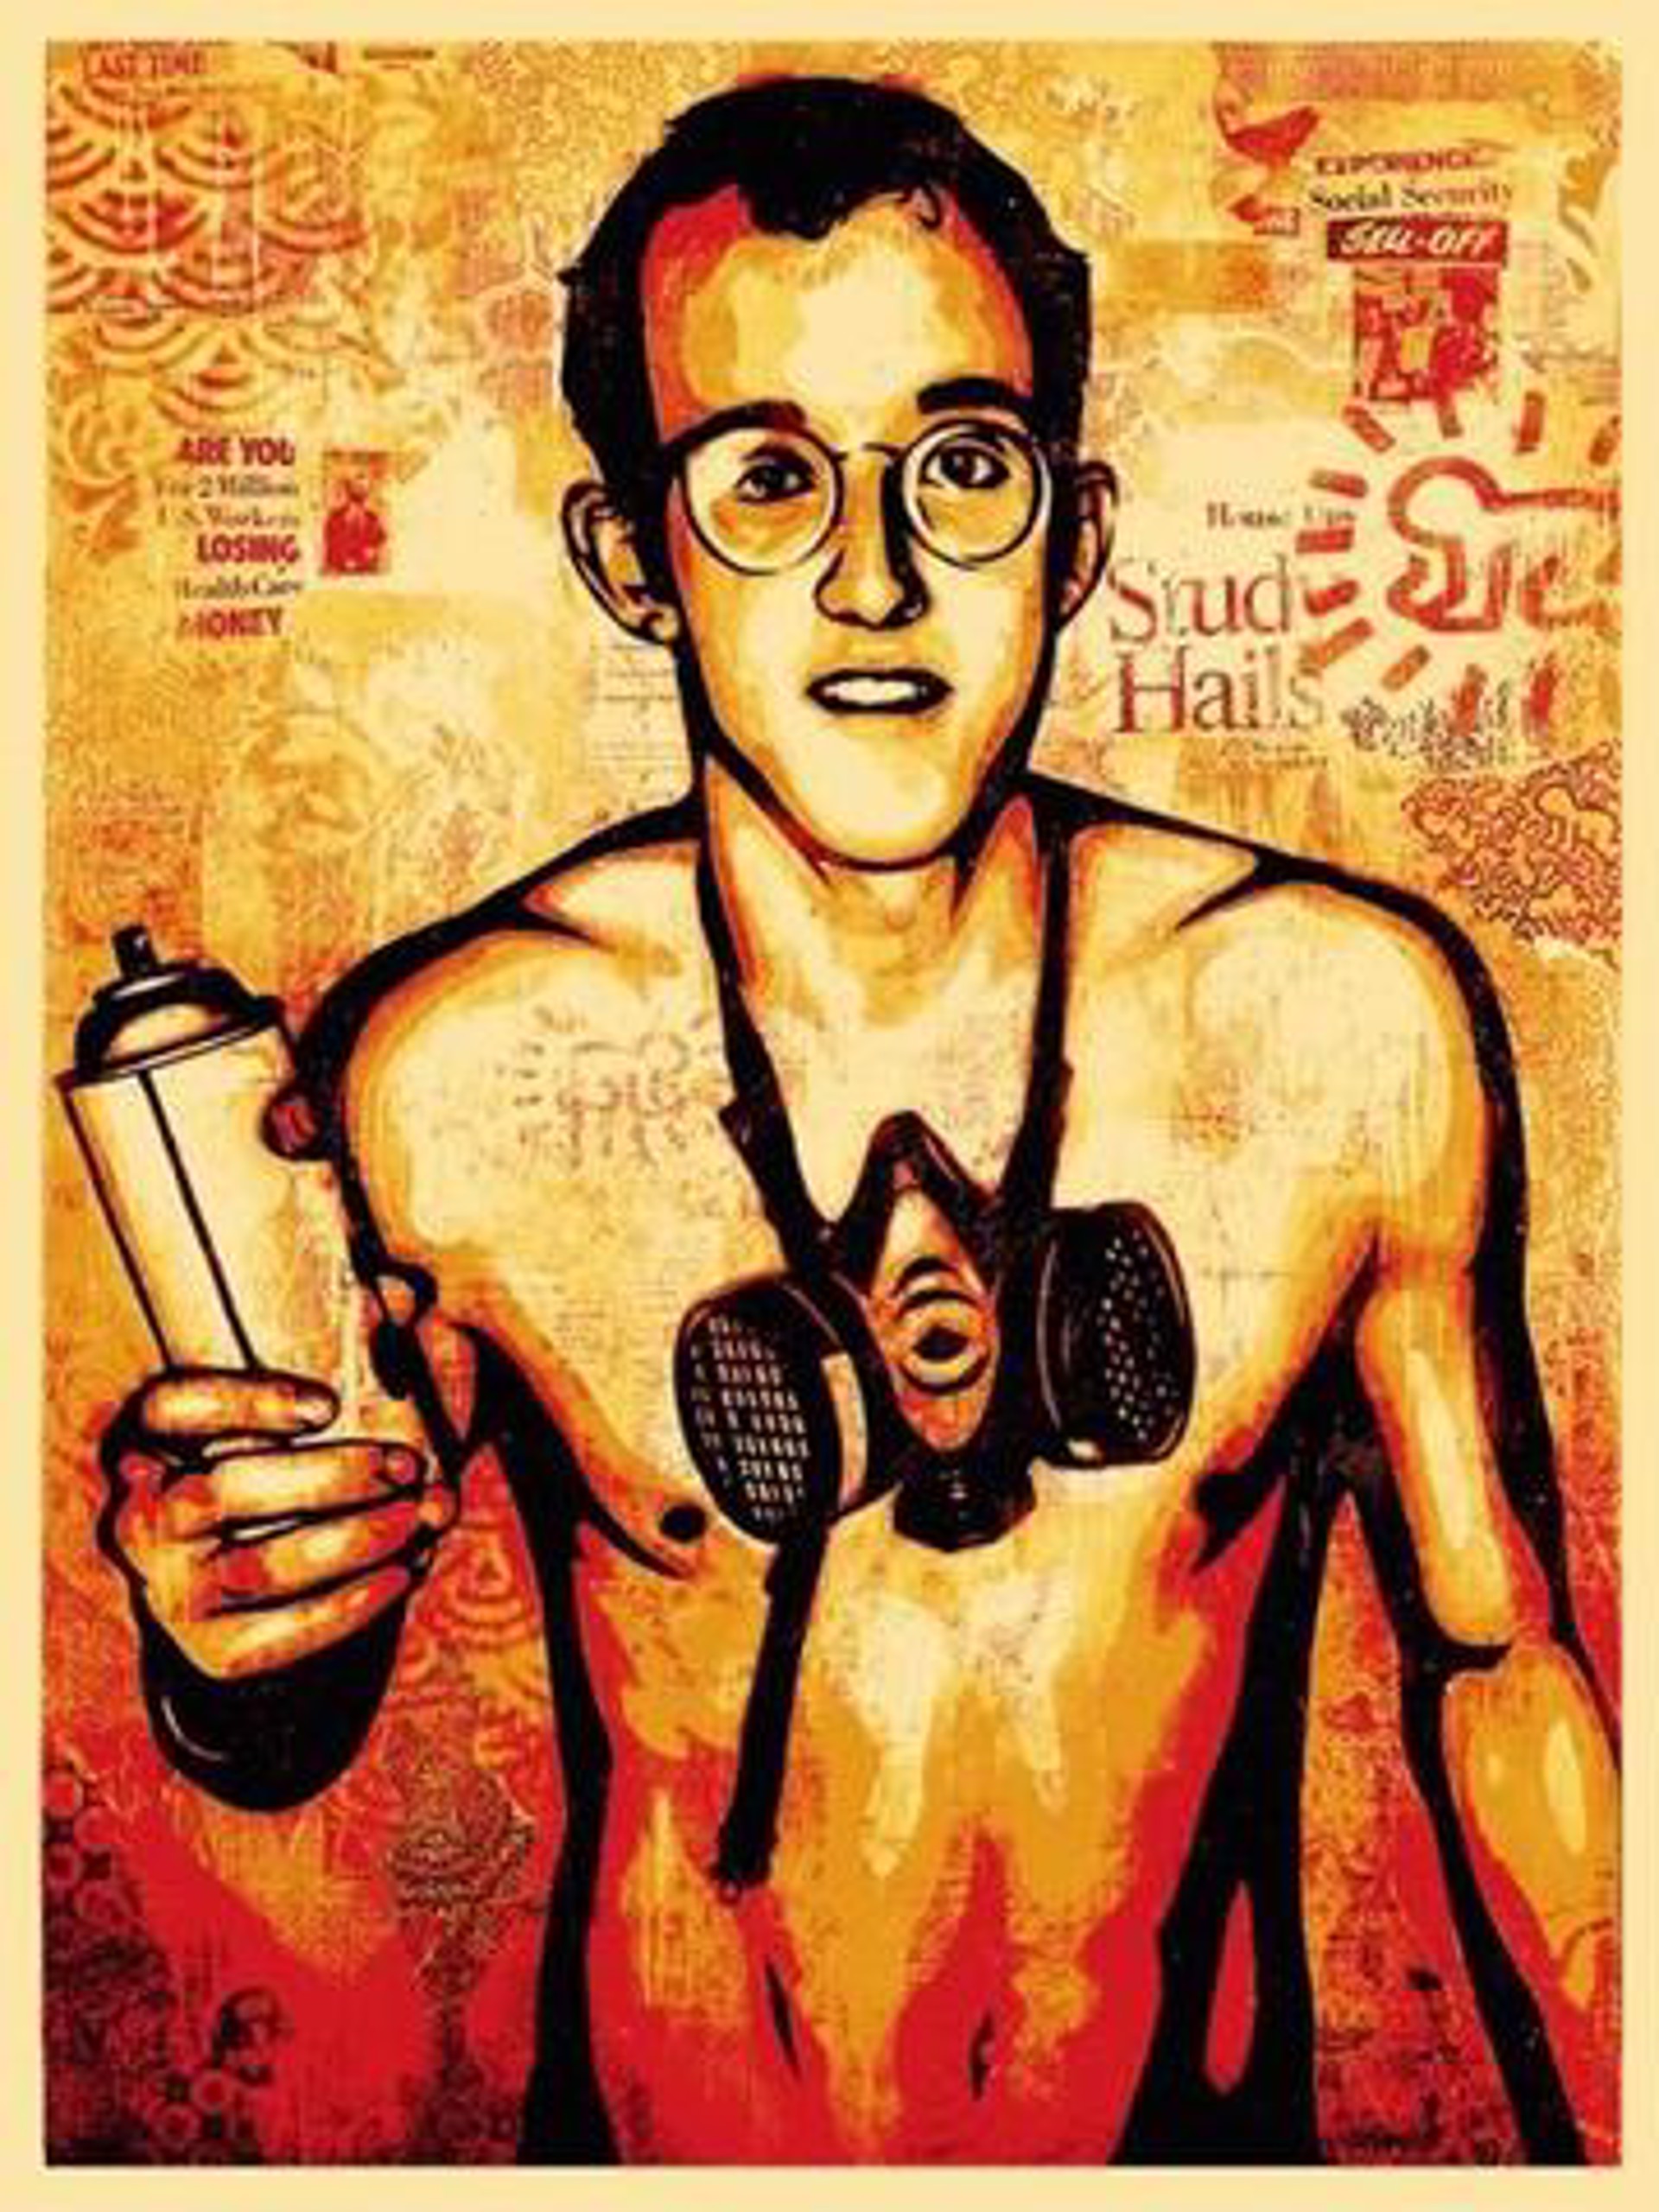 Keith Haring (sold) by Shepard Fairey